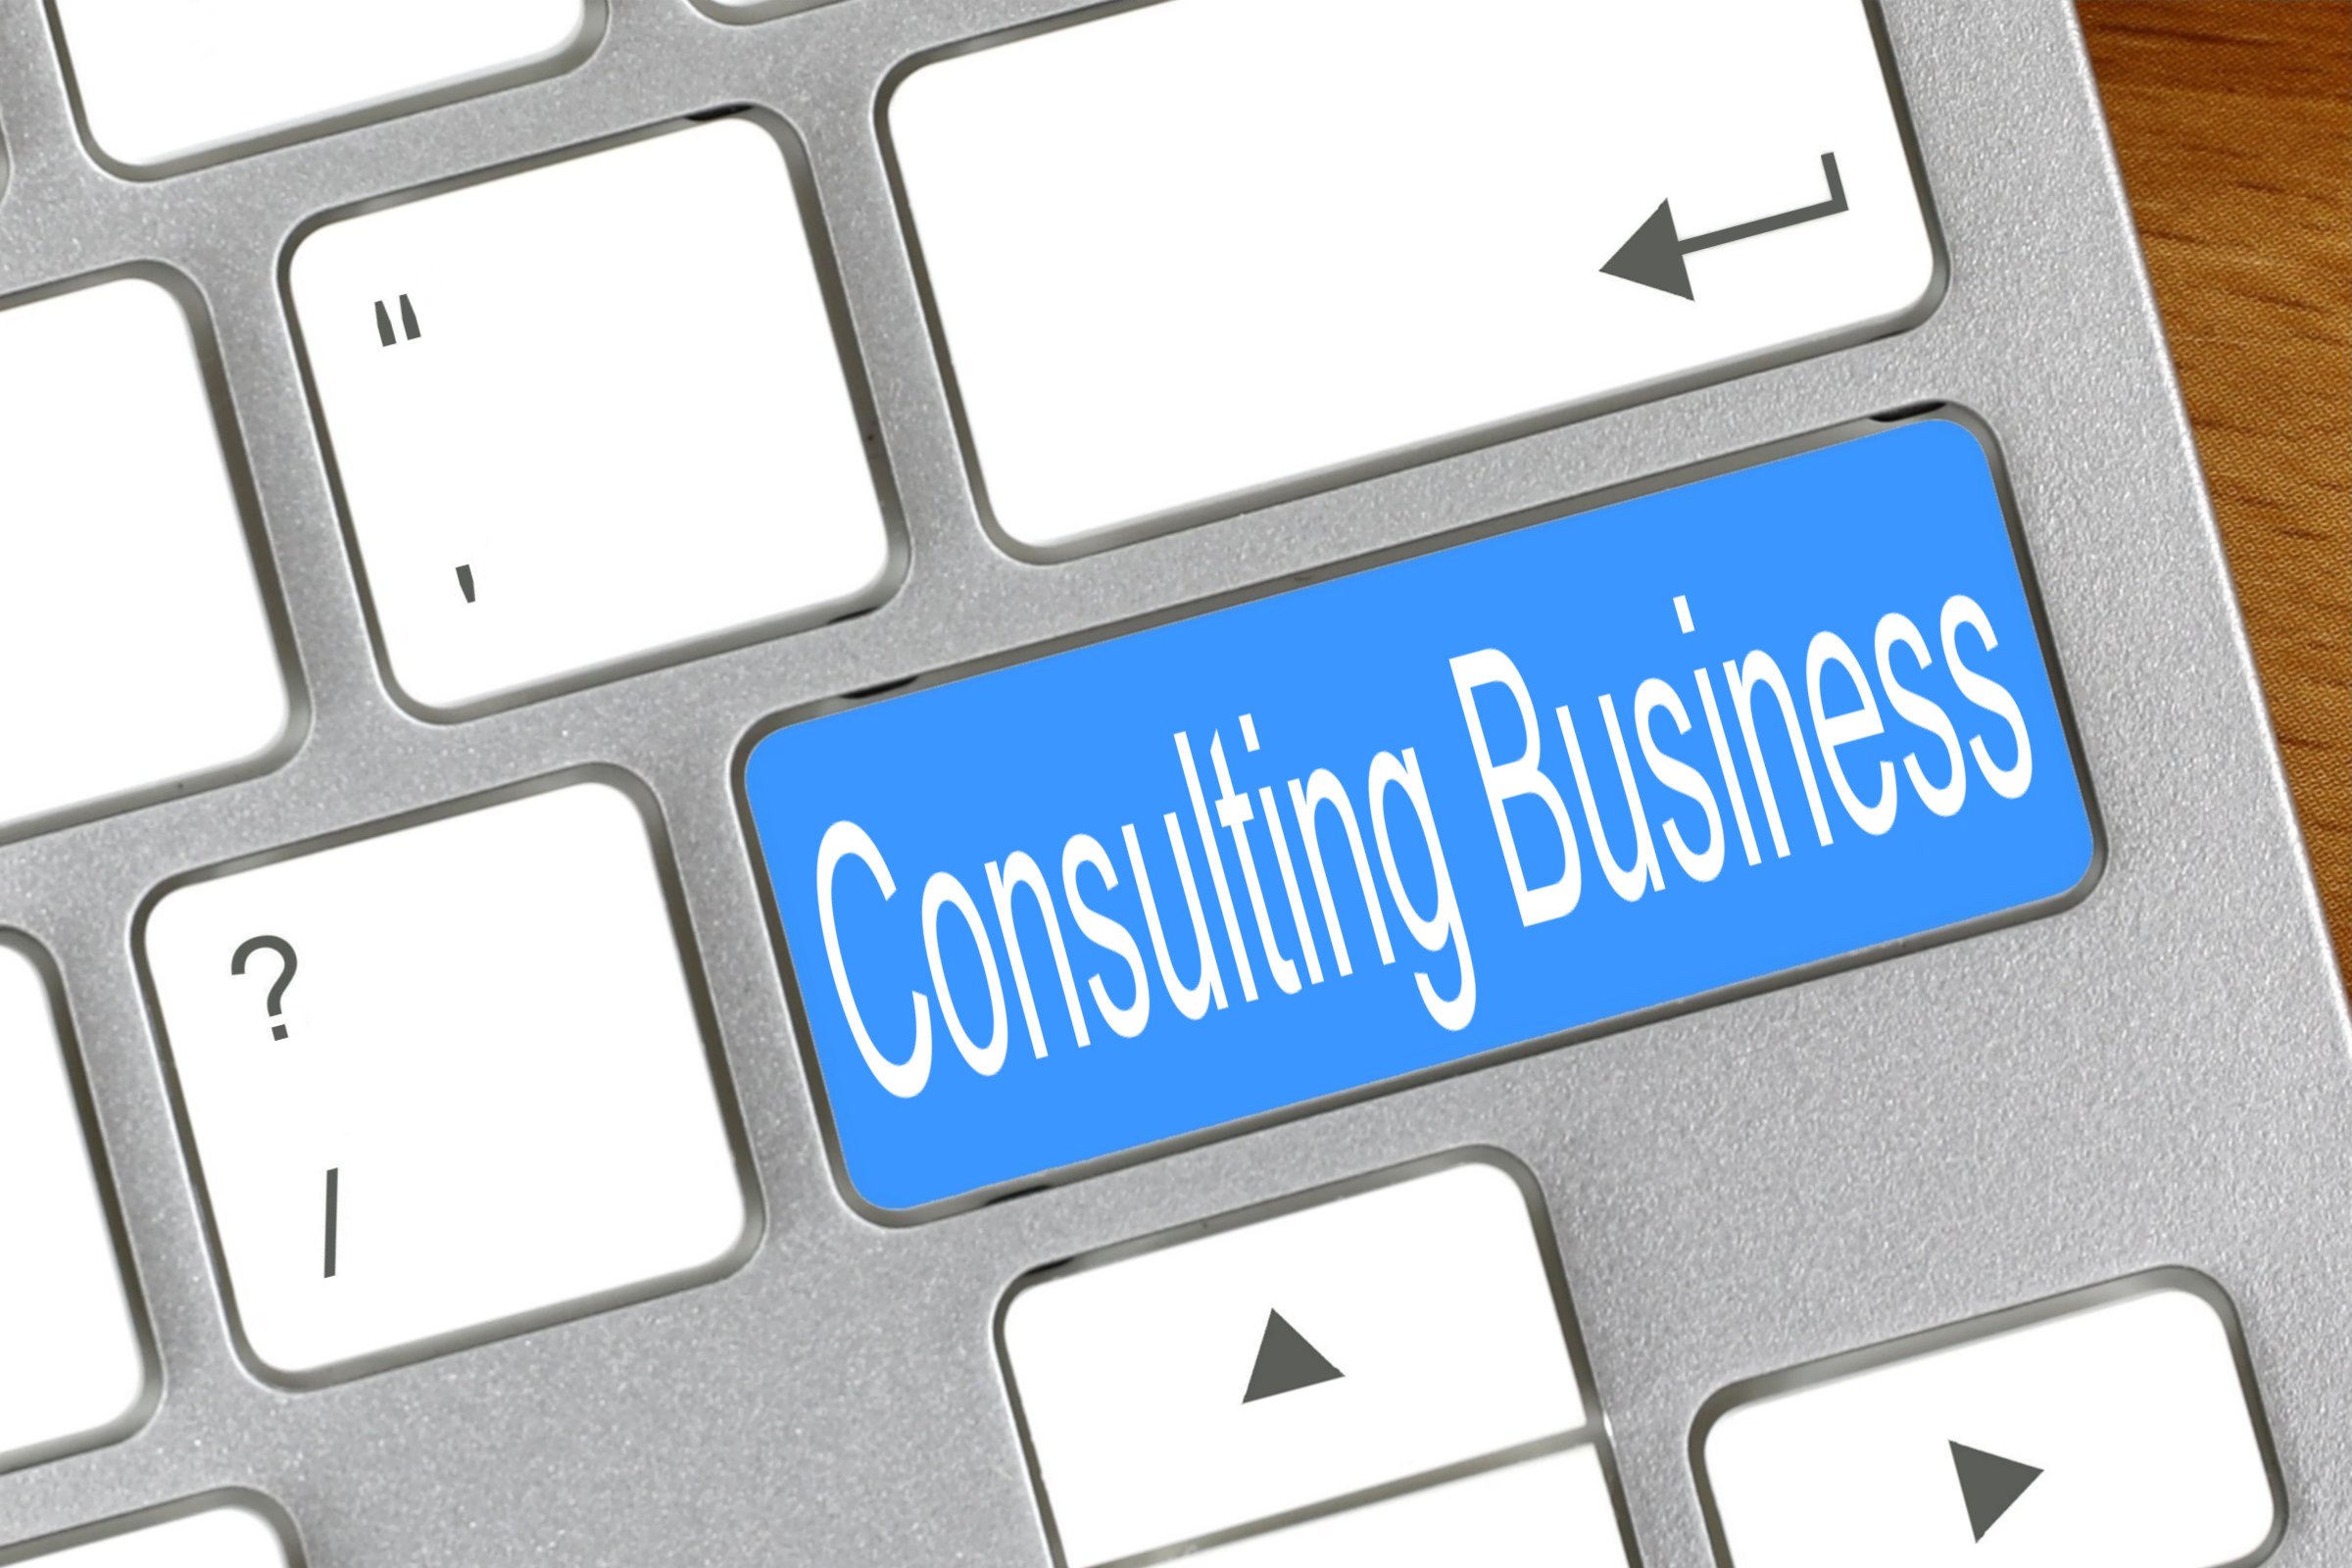 consulting business